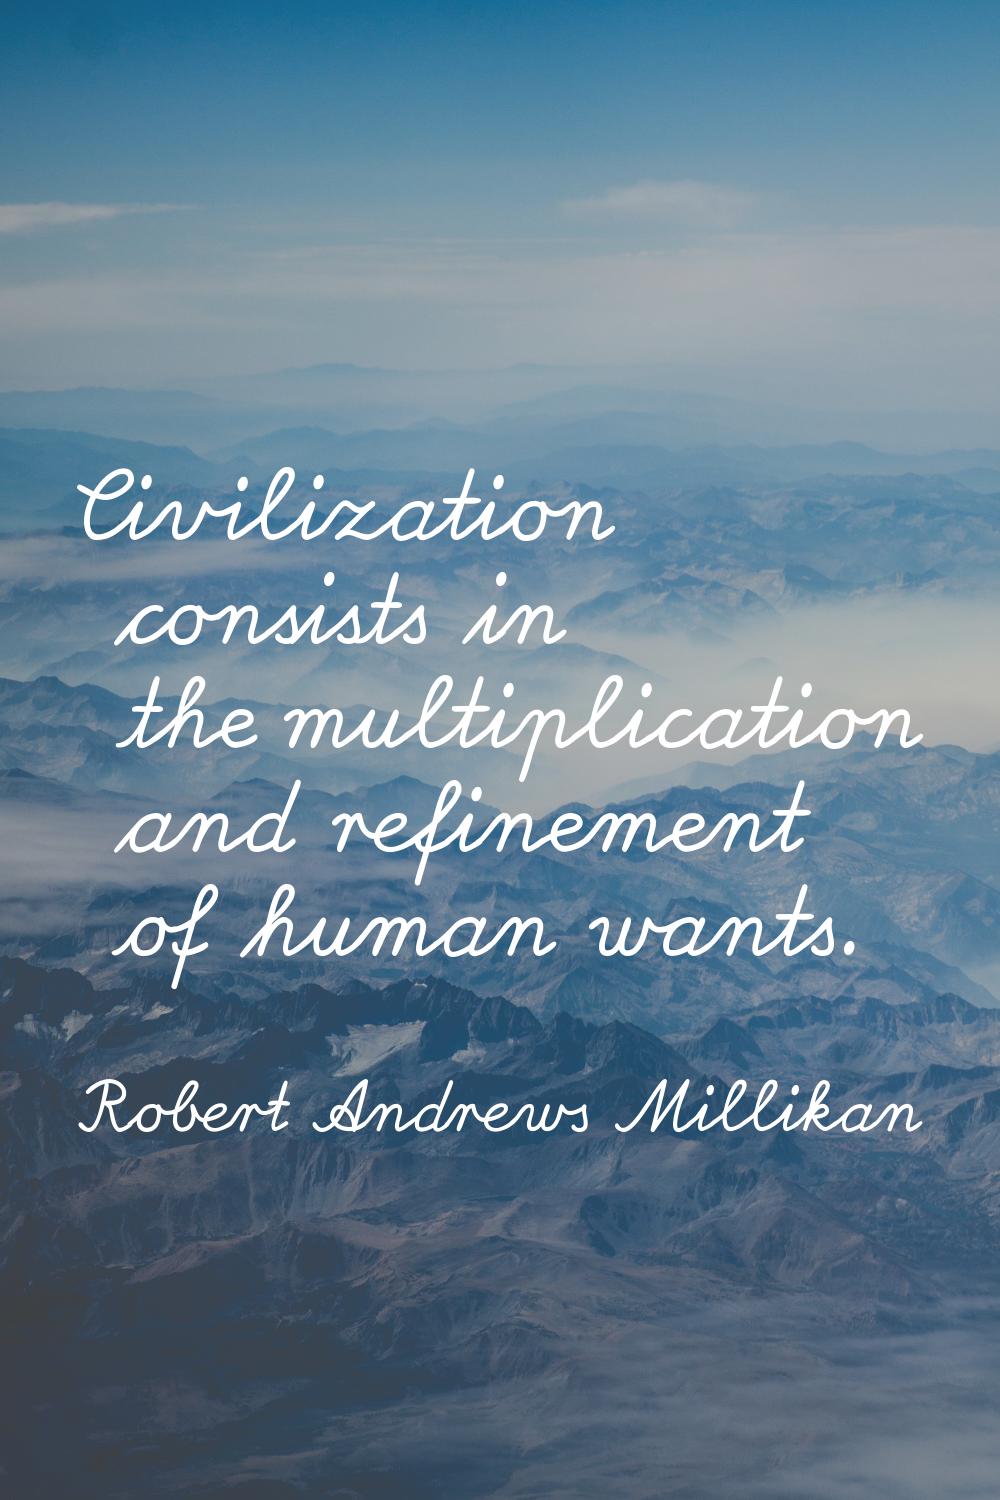 Civilization consists in the multiplication and refinement of human wants.